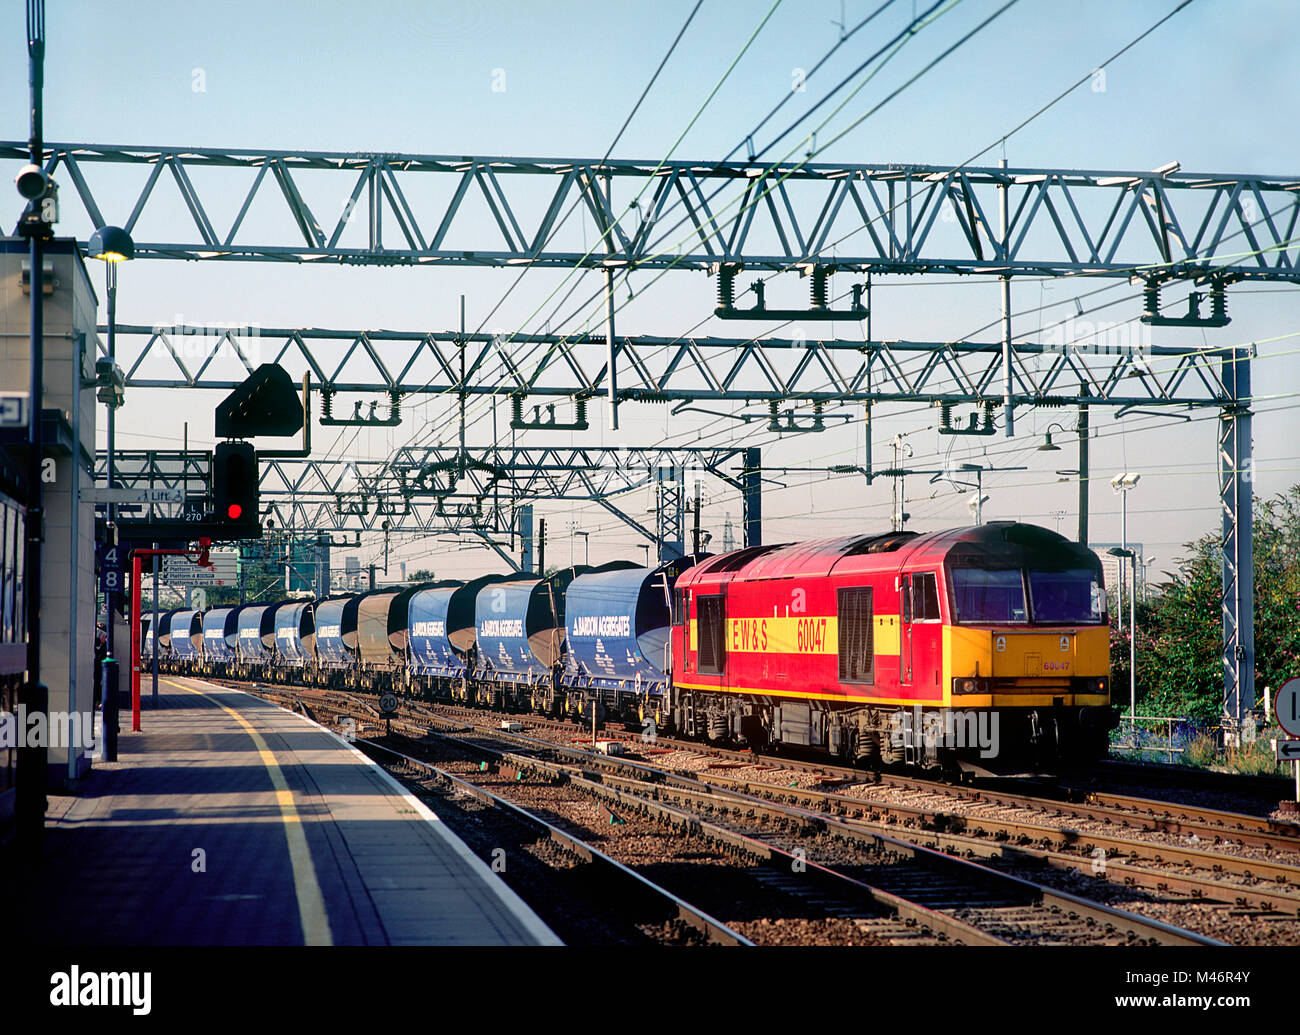 A Class 60 Diesel Locomotive Number Working A Train Of Empty Bardon Aggregates Wagons At Stratford In East London 17th September 03 Stock Photo Alamy